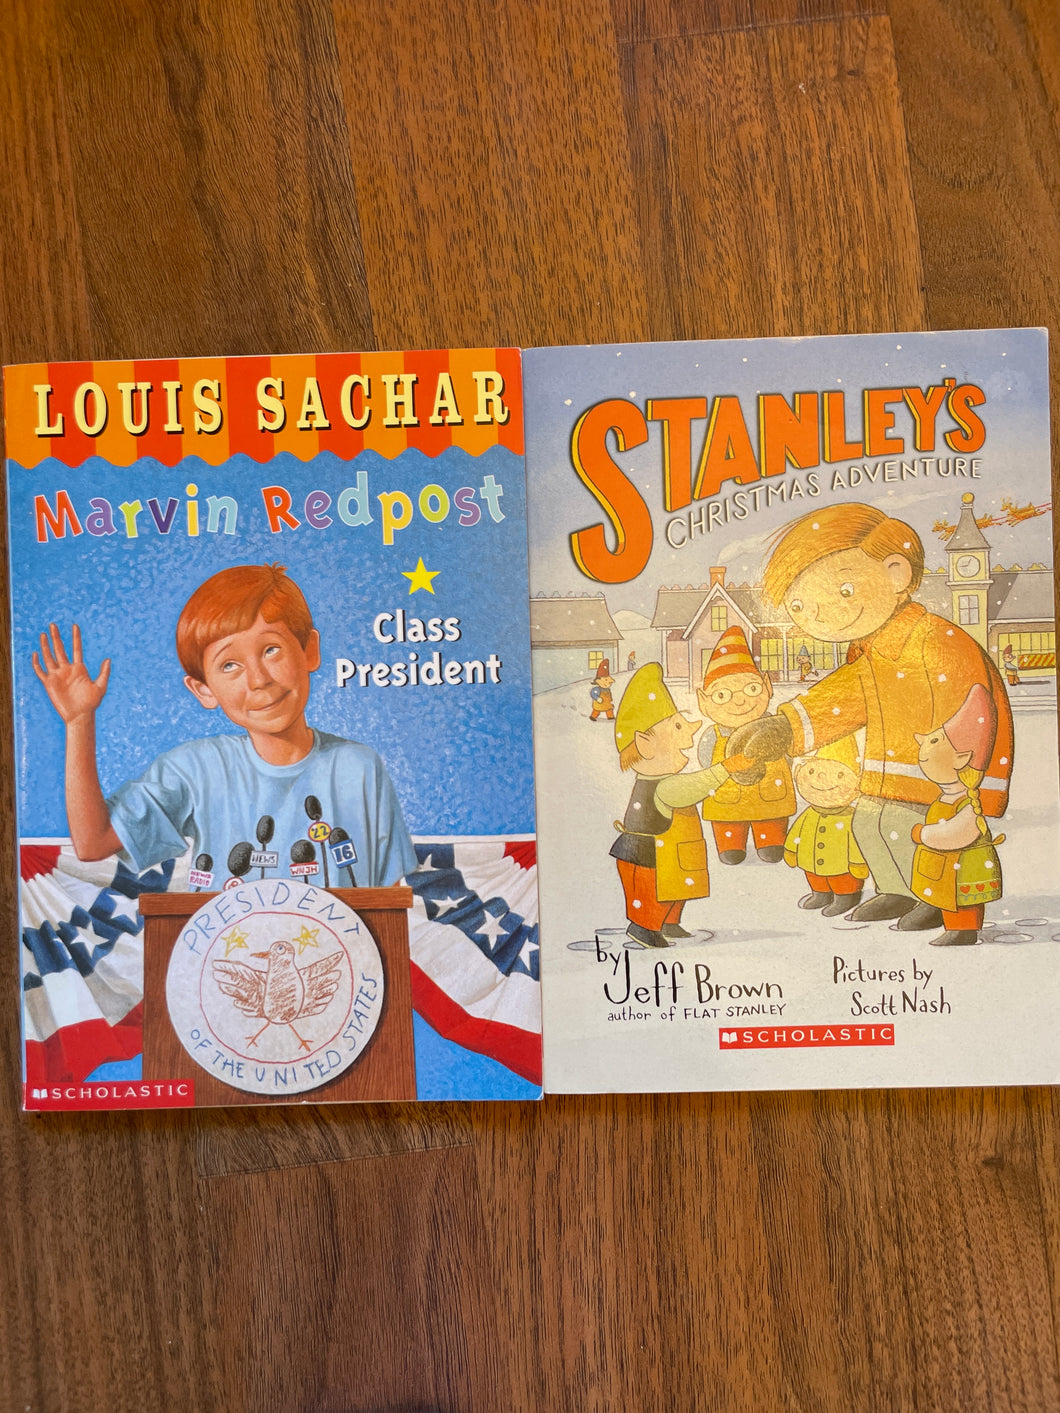 Set of 2 books Marvin Redpost by Louis Sachar and Flat Stanley Christmas